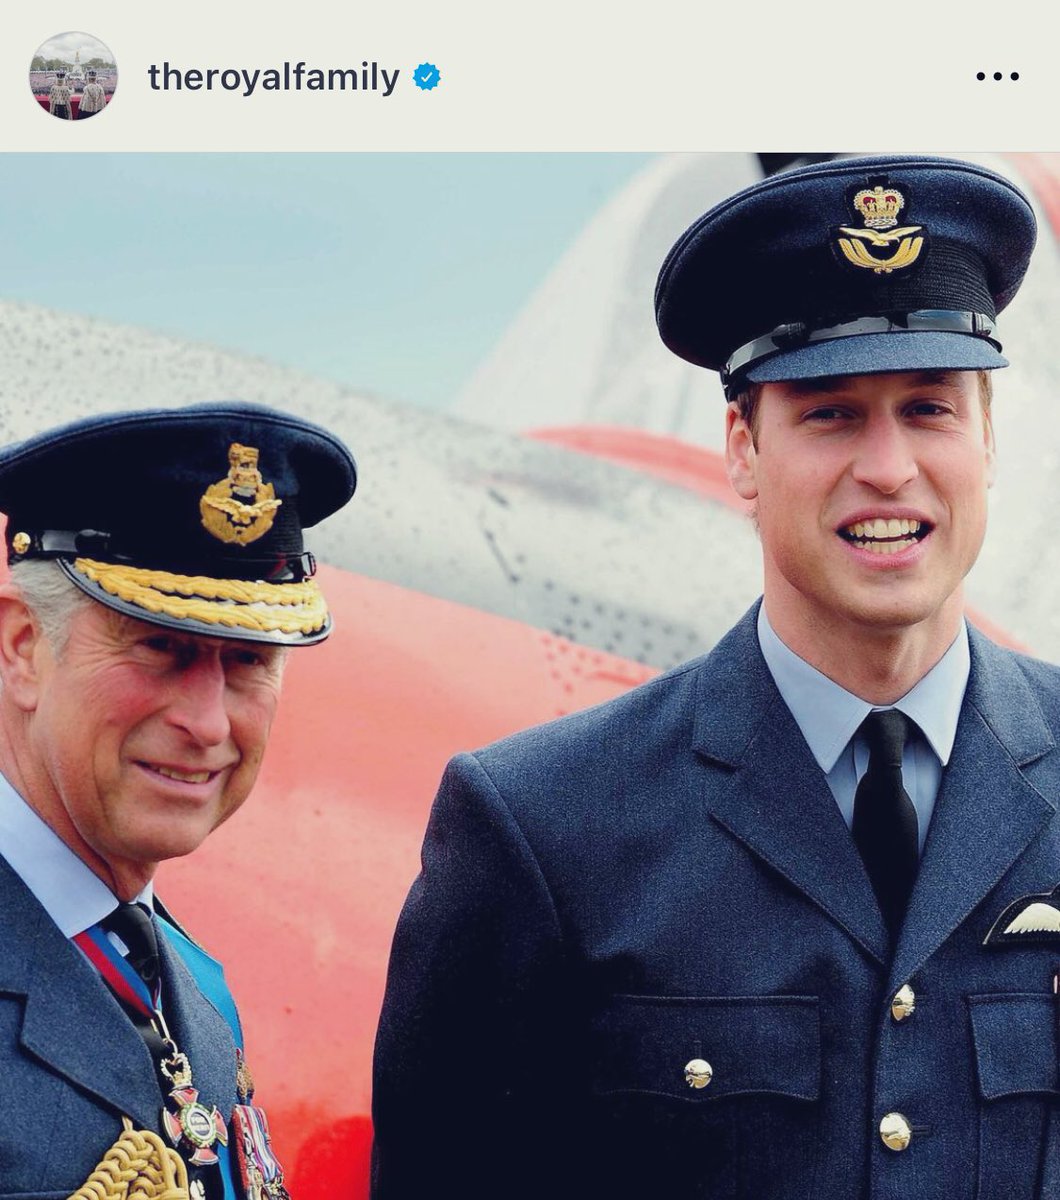 #ArmedForcesDay The Royal Family’s instagram.